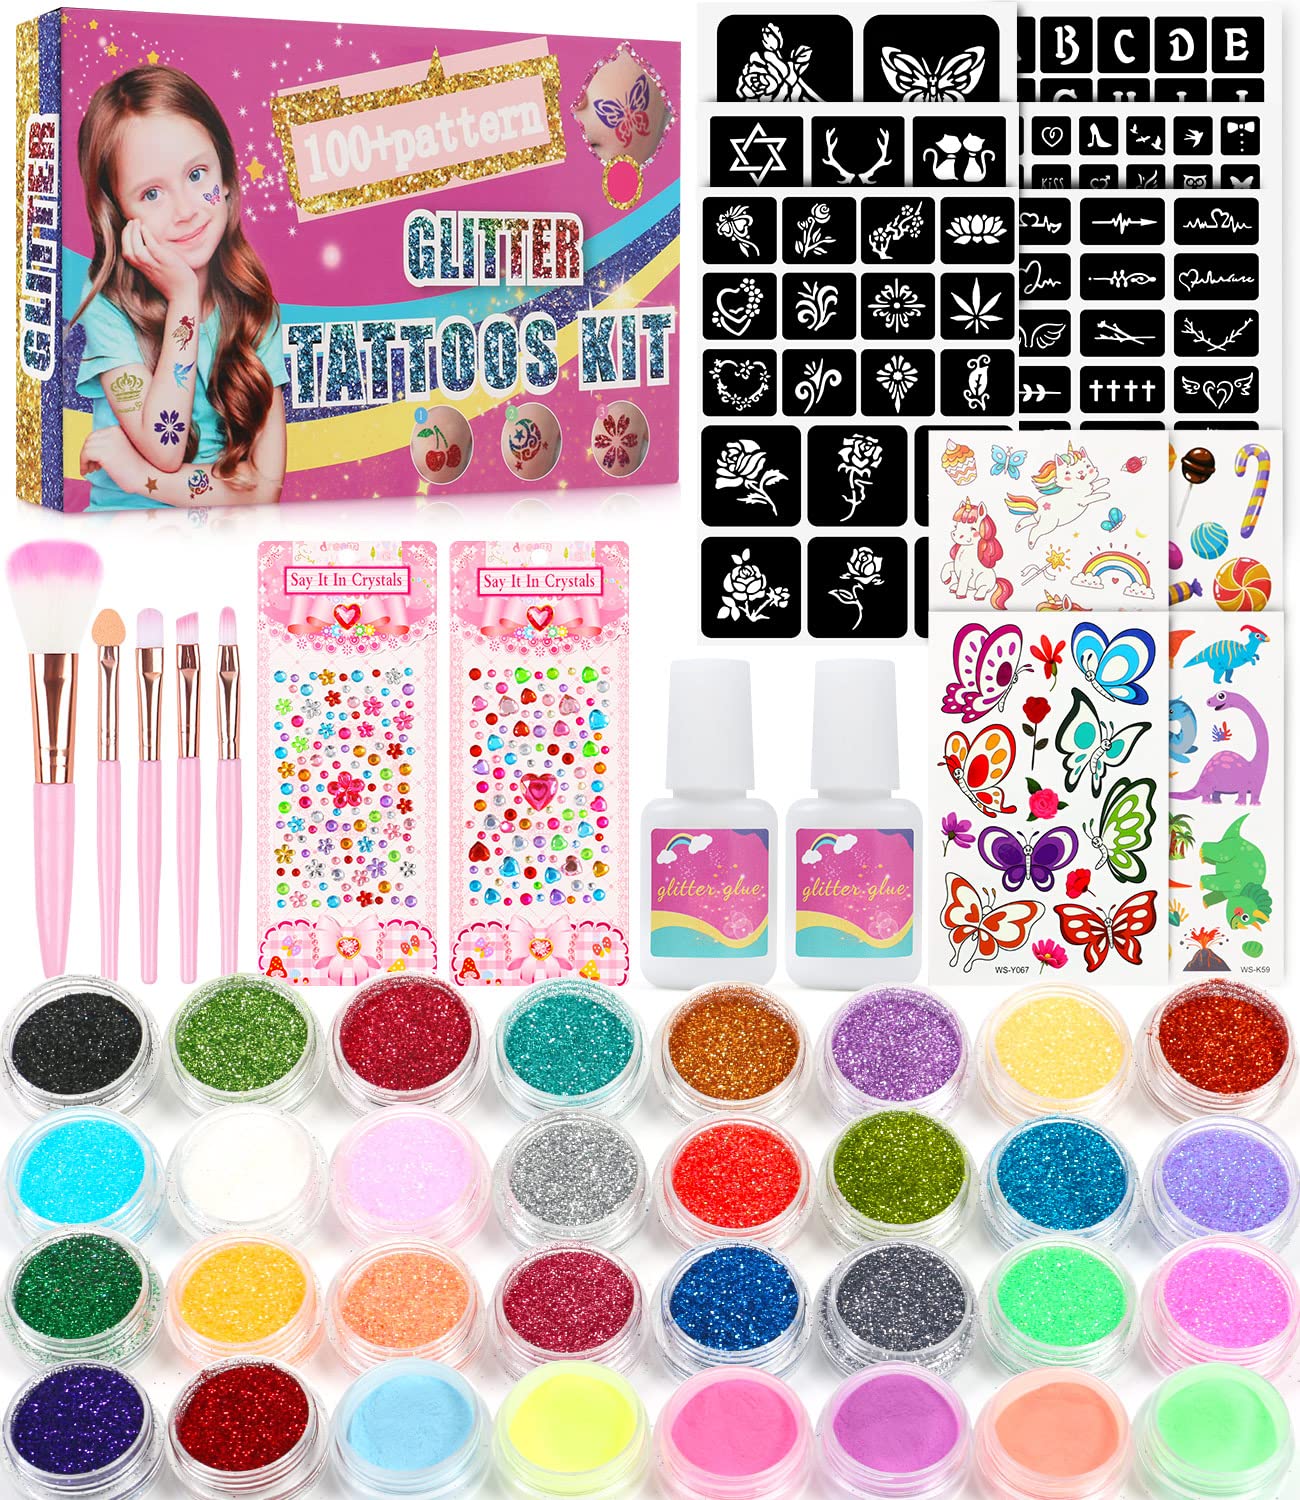 CkFyahp Temporary Glitter Tattoo Kit for Kids with 30 Glitter Colors 6  Fluorescent Colors 119 Unique Stencils 3 Body Glue 5 Brushes Arts Glitter  Make Up Set for Birthdays Party Favor Supplies